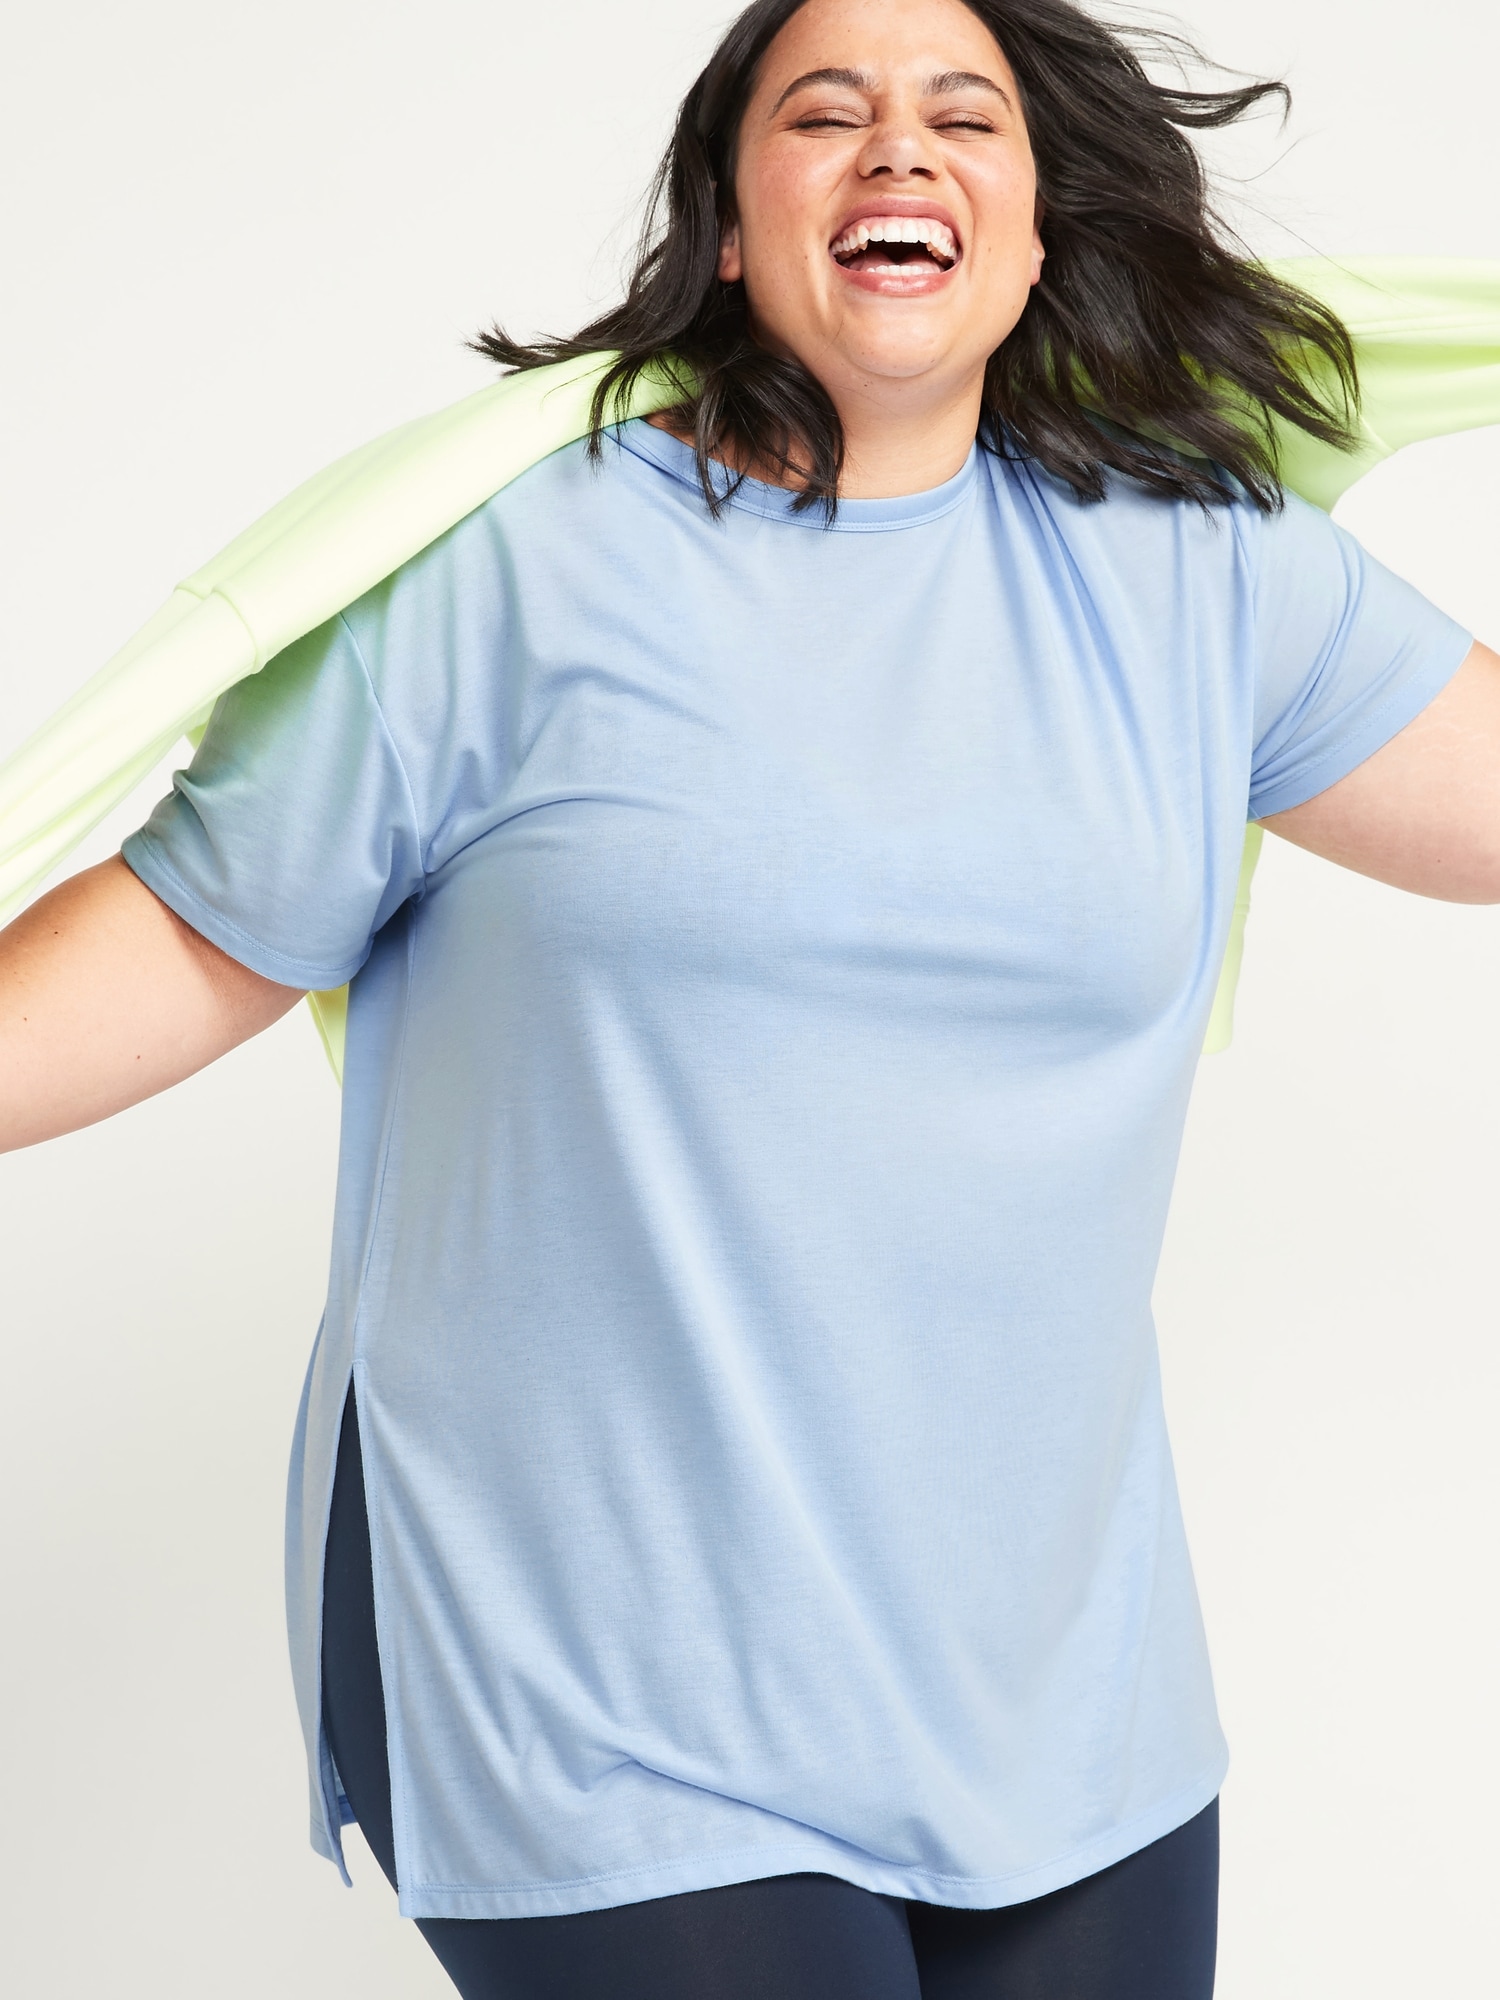 Oversized UltraLite Plus-Size Performance Tee | Old Navy